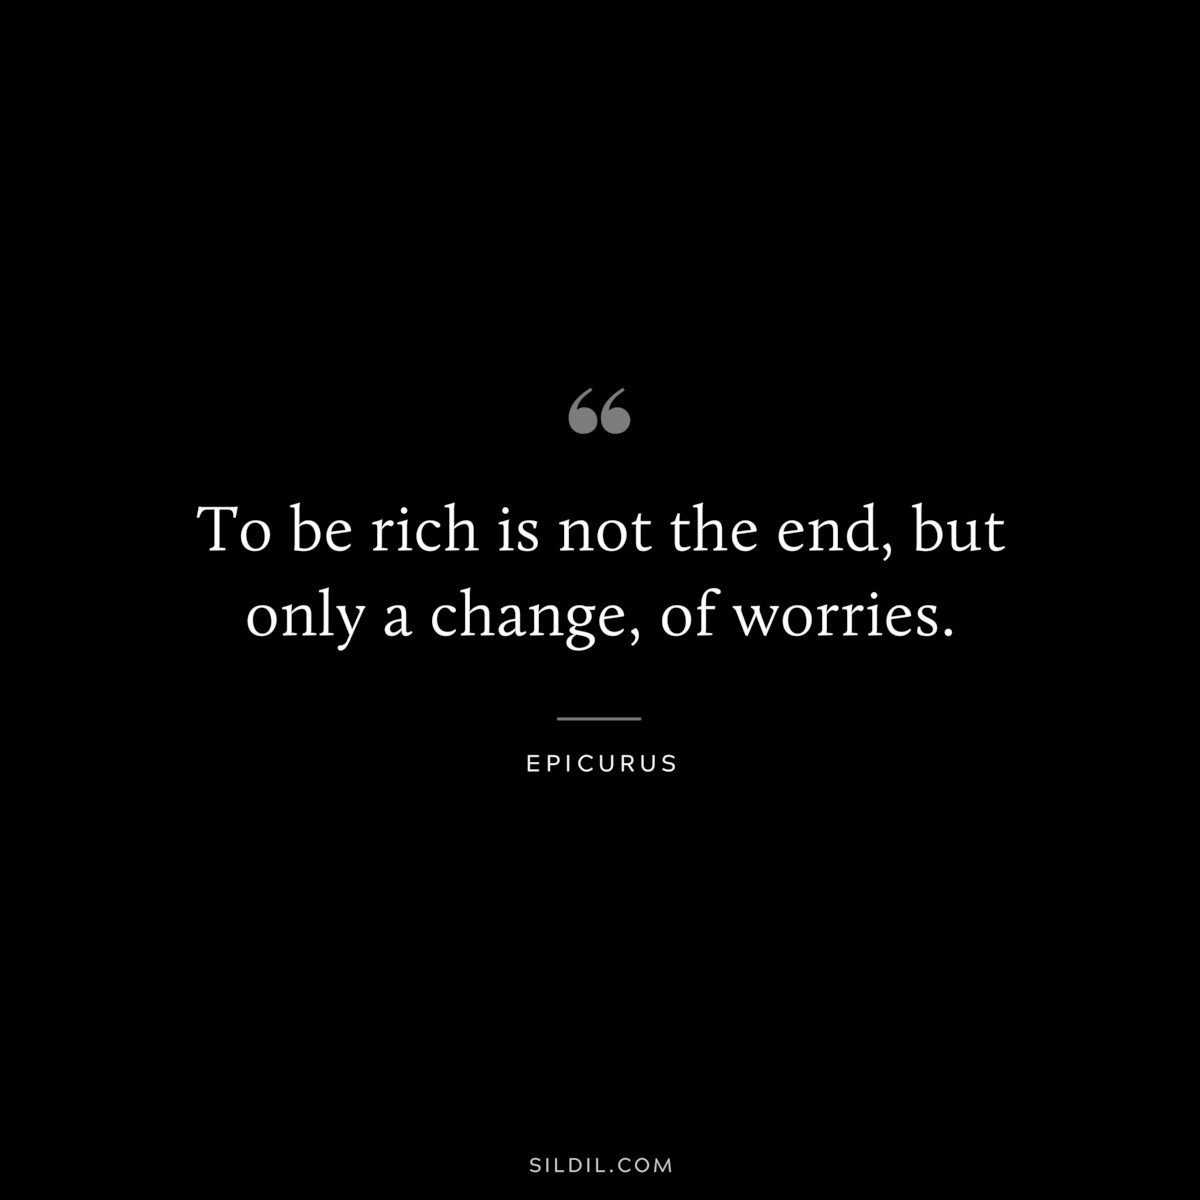 To be rich is not the end, but only a change, of worries. — Epicurus